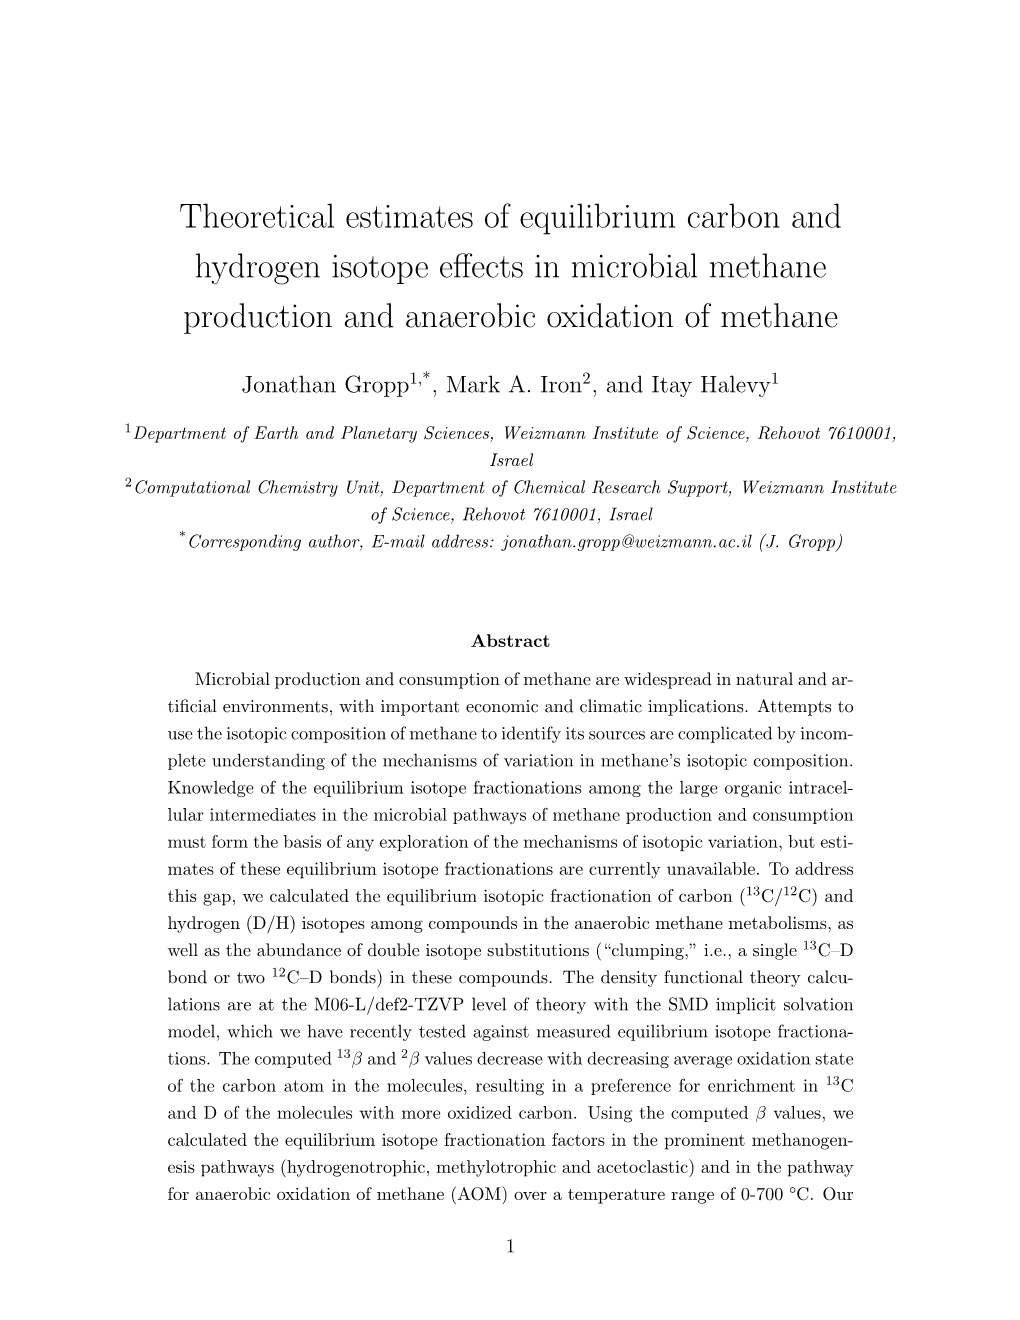 Theoretical Estimates of Equilibrium Carbon and Hydrogen Isotope Eﬀects in Microbial Methane Production and Anaerobic Oxidation of Methane